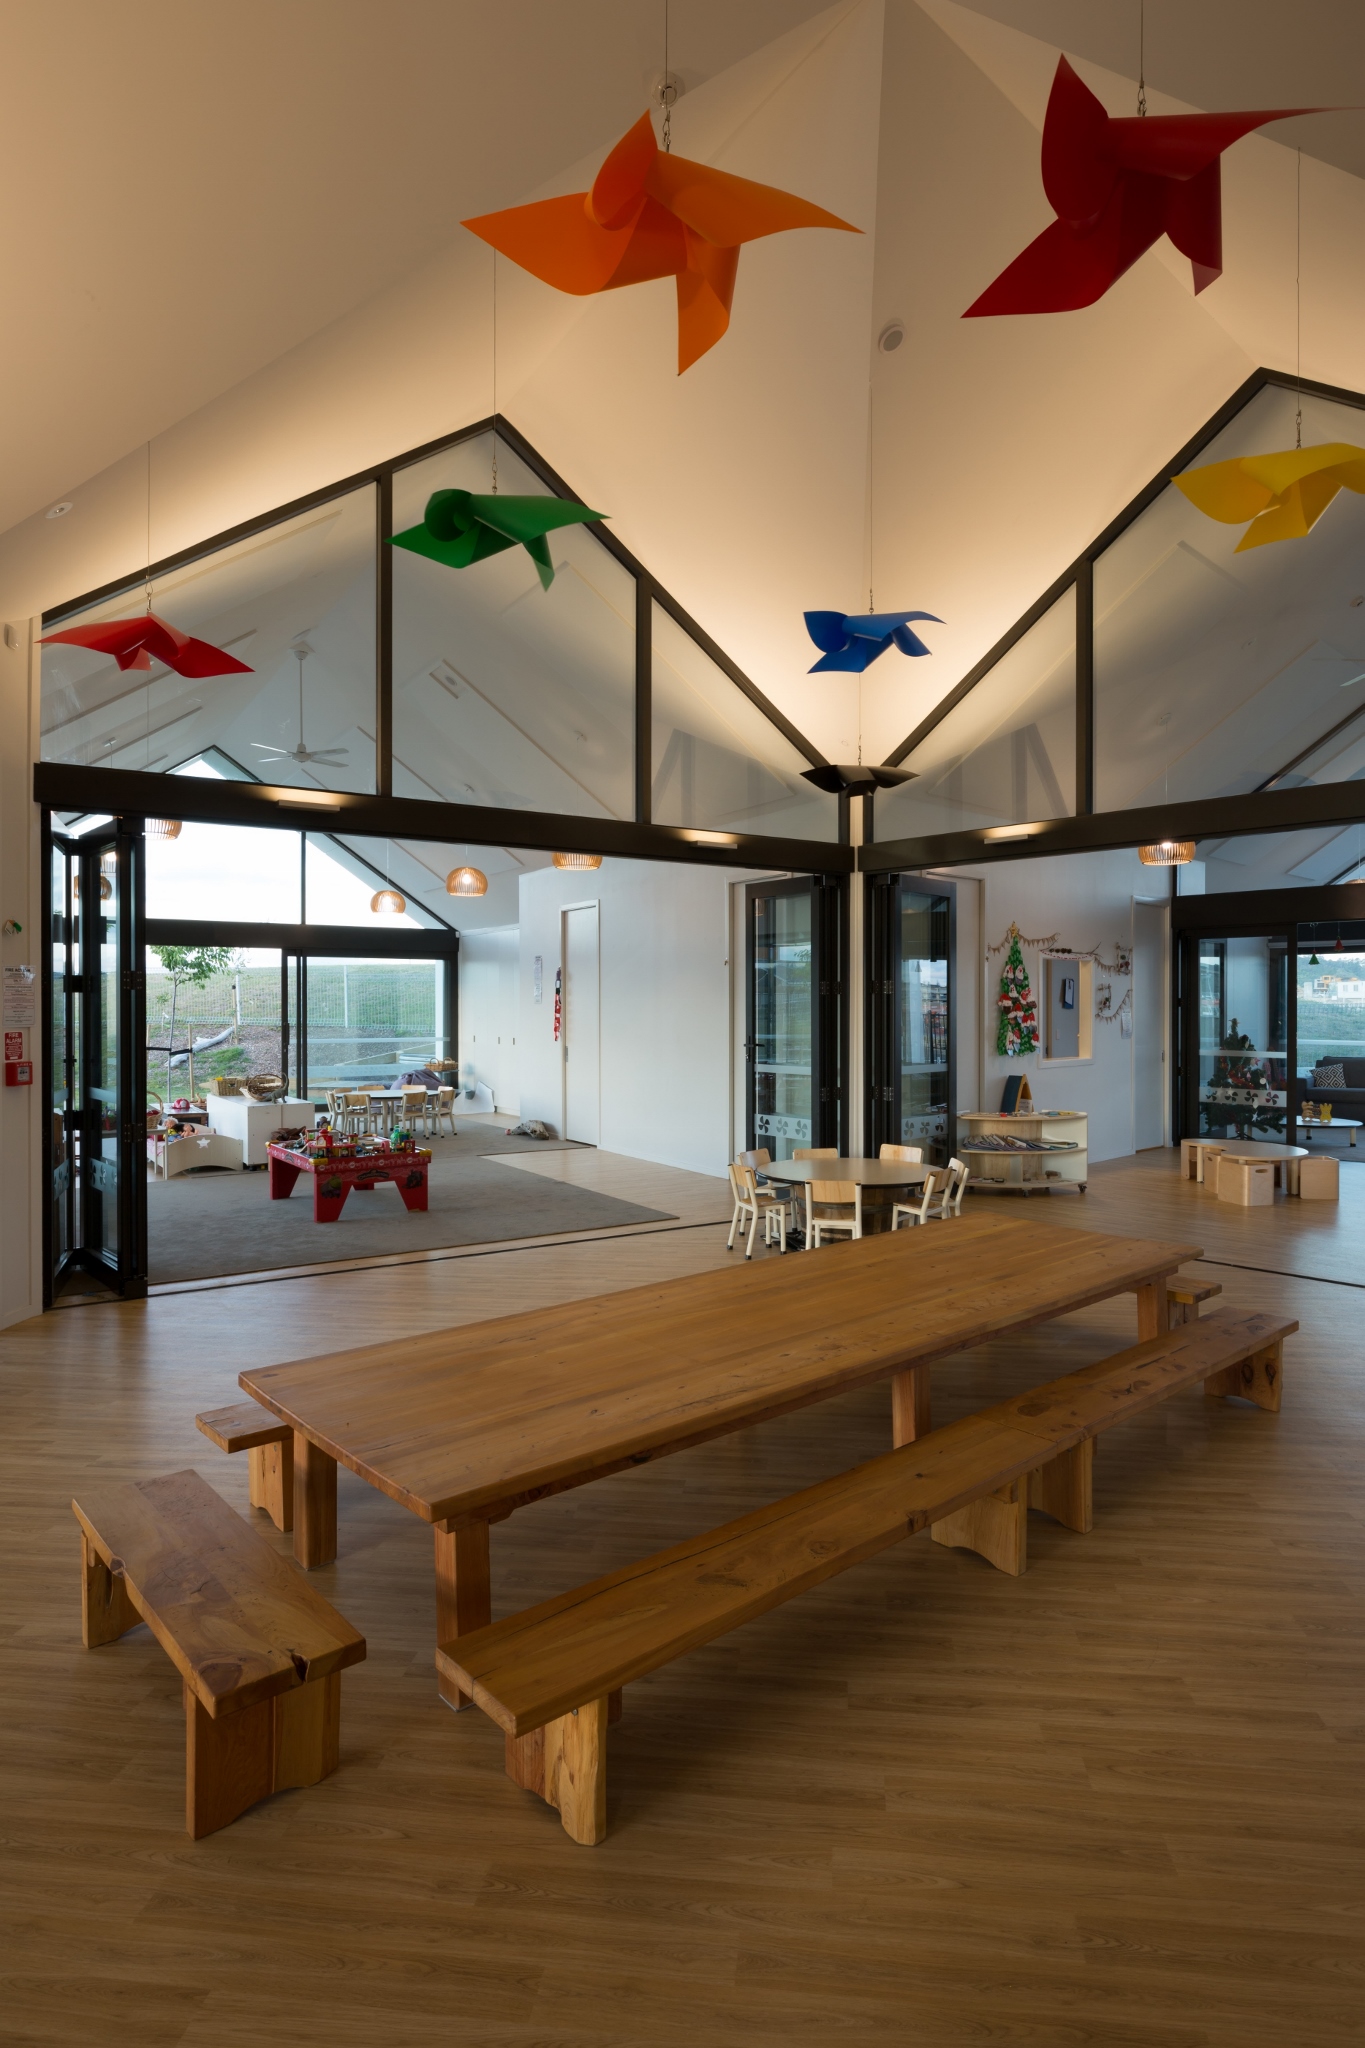 hobsonville point early learning centre-15